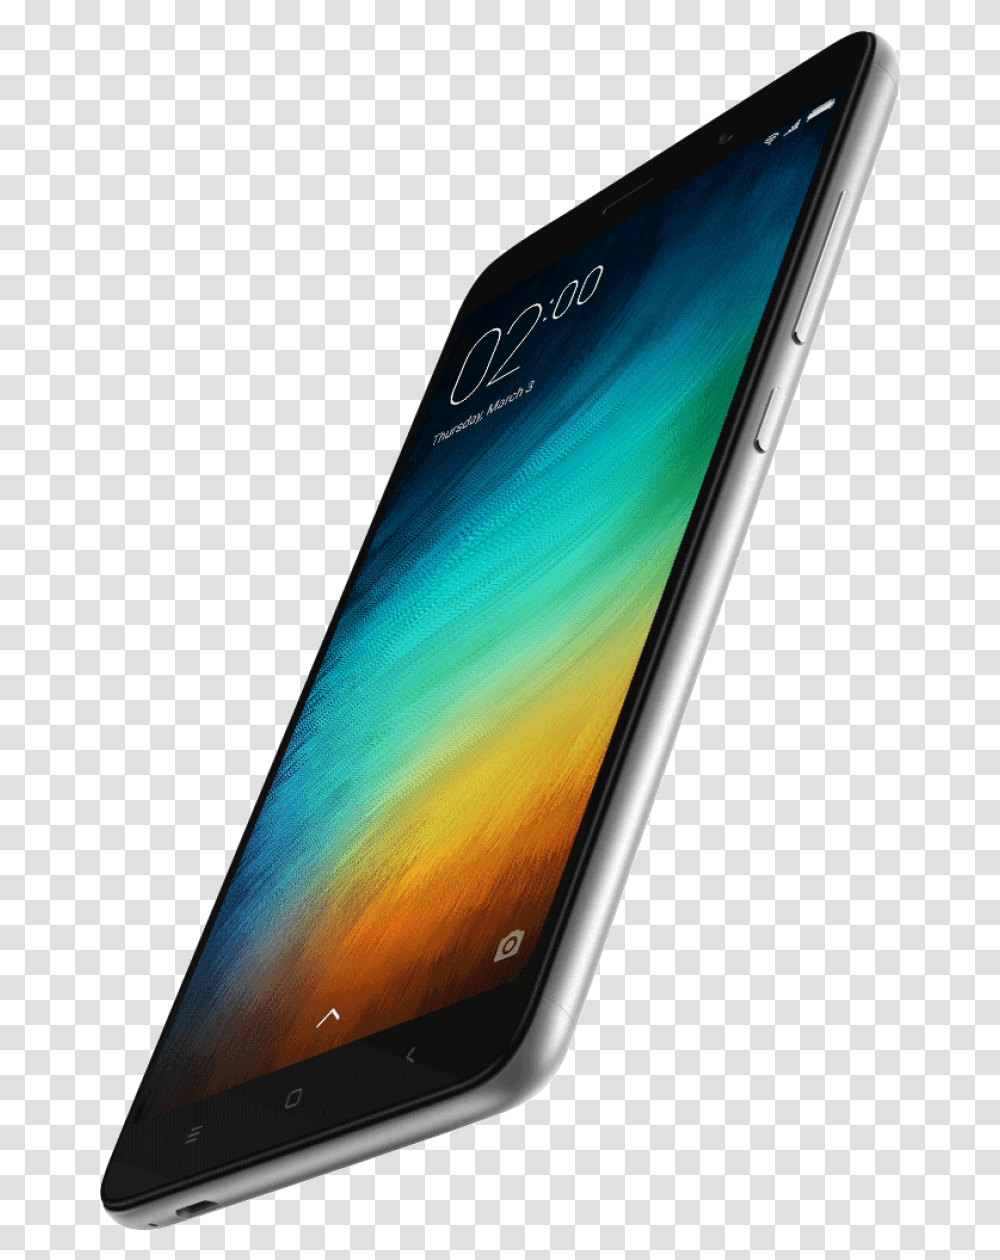 Xiaomi Phone Flying Sideways Image Xiaomi Phone, Mobile Phone, Electronics, Cell Phone, Iphone Transparent Png